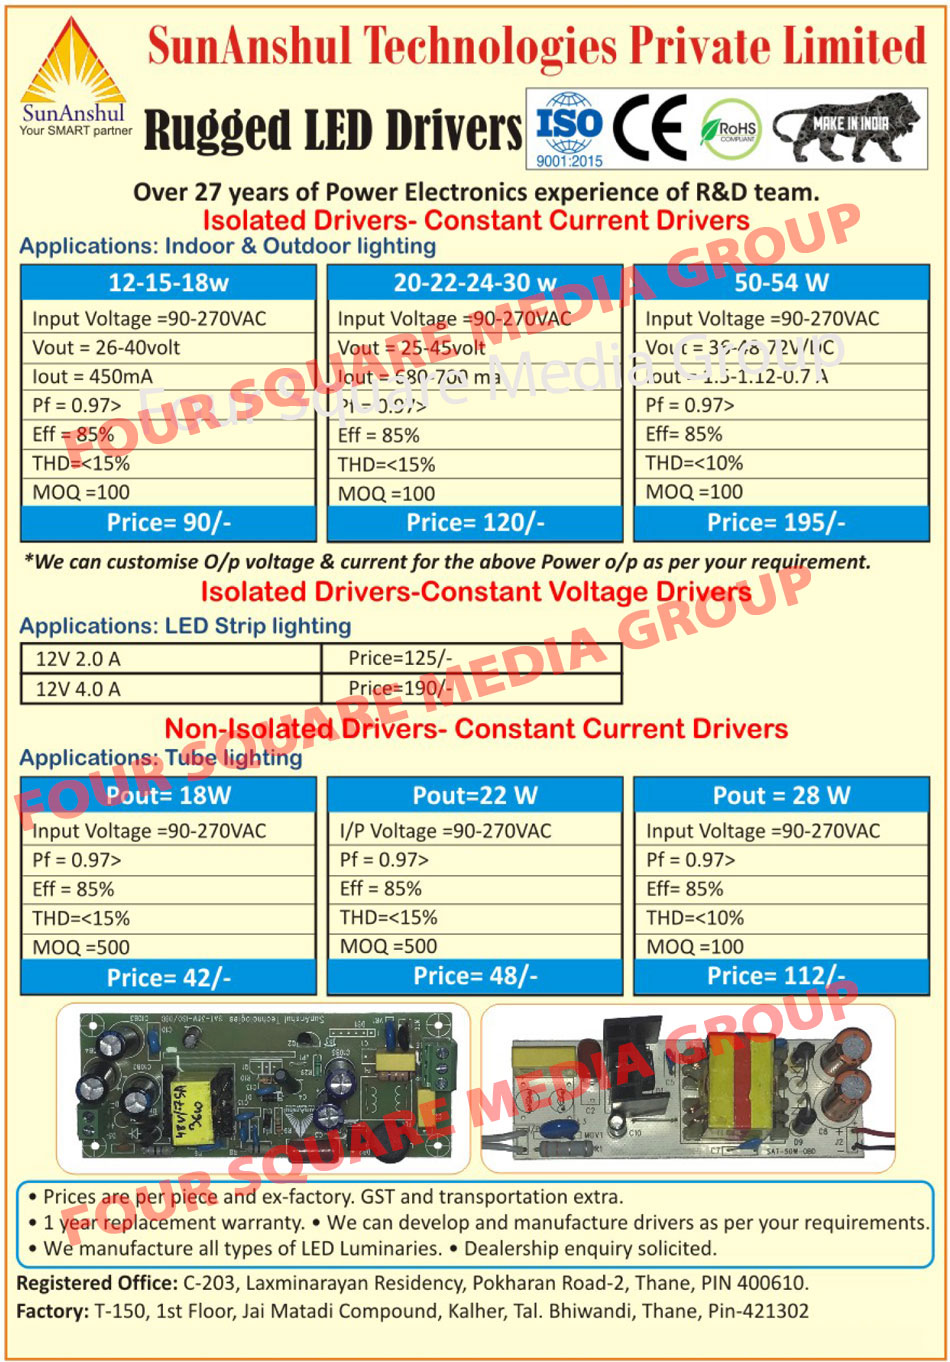 Led Drivers, Isolated Drivers, Constant Current Drivers, Constant Voltage Drivers, Non Isolated Drivers